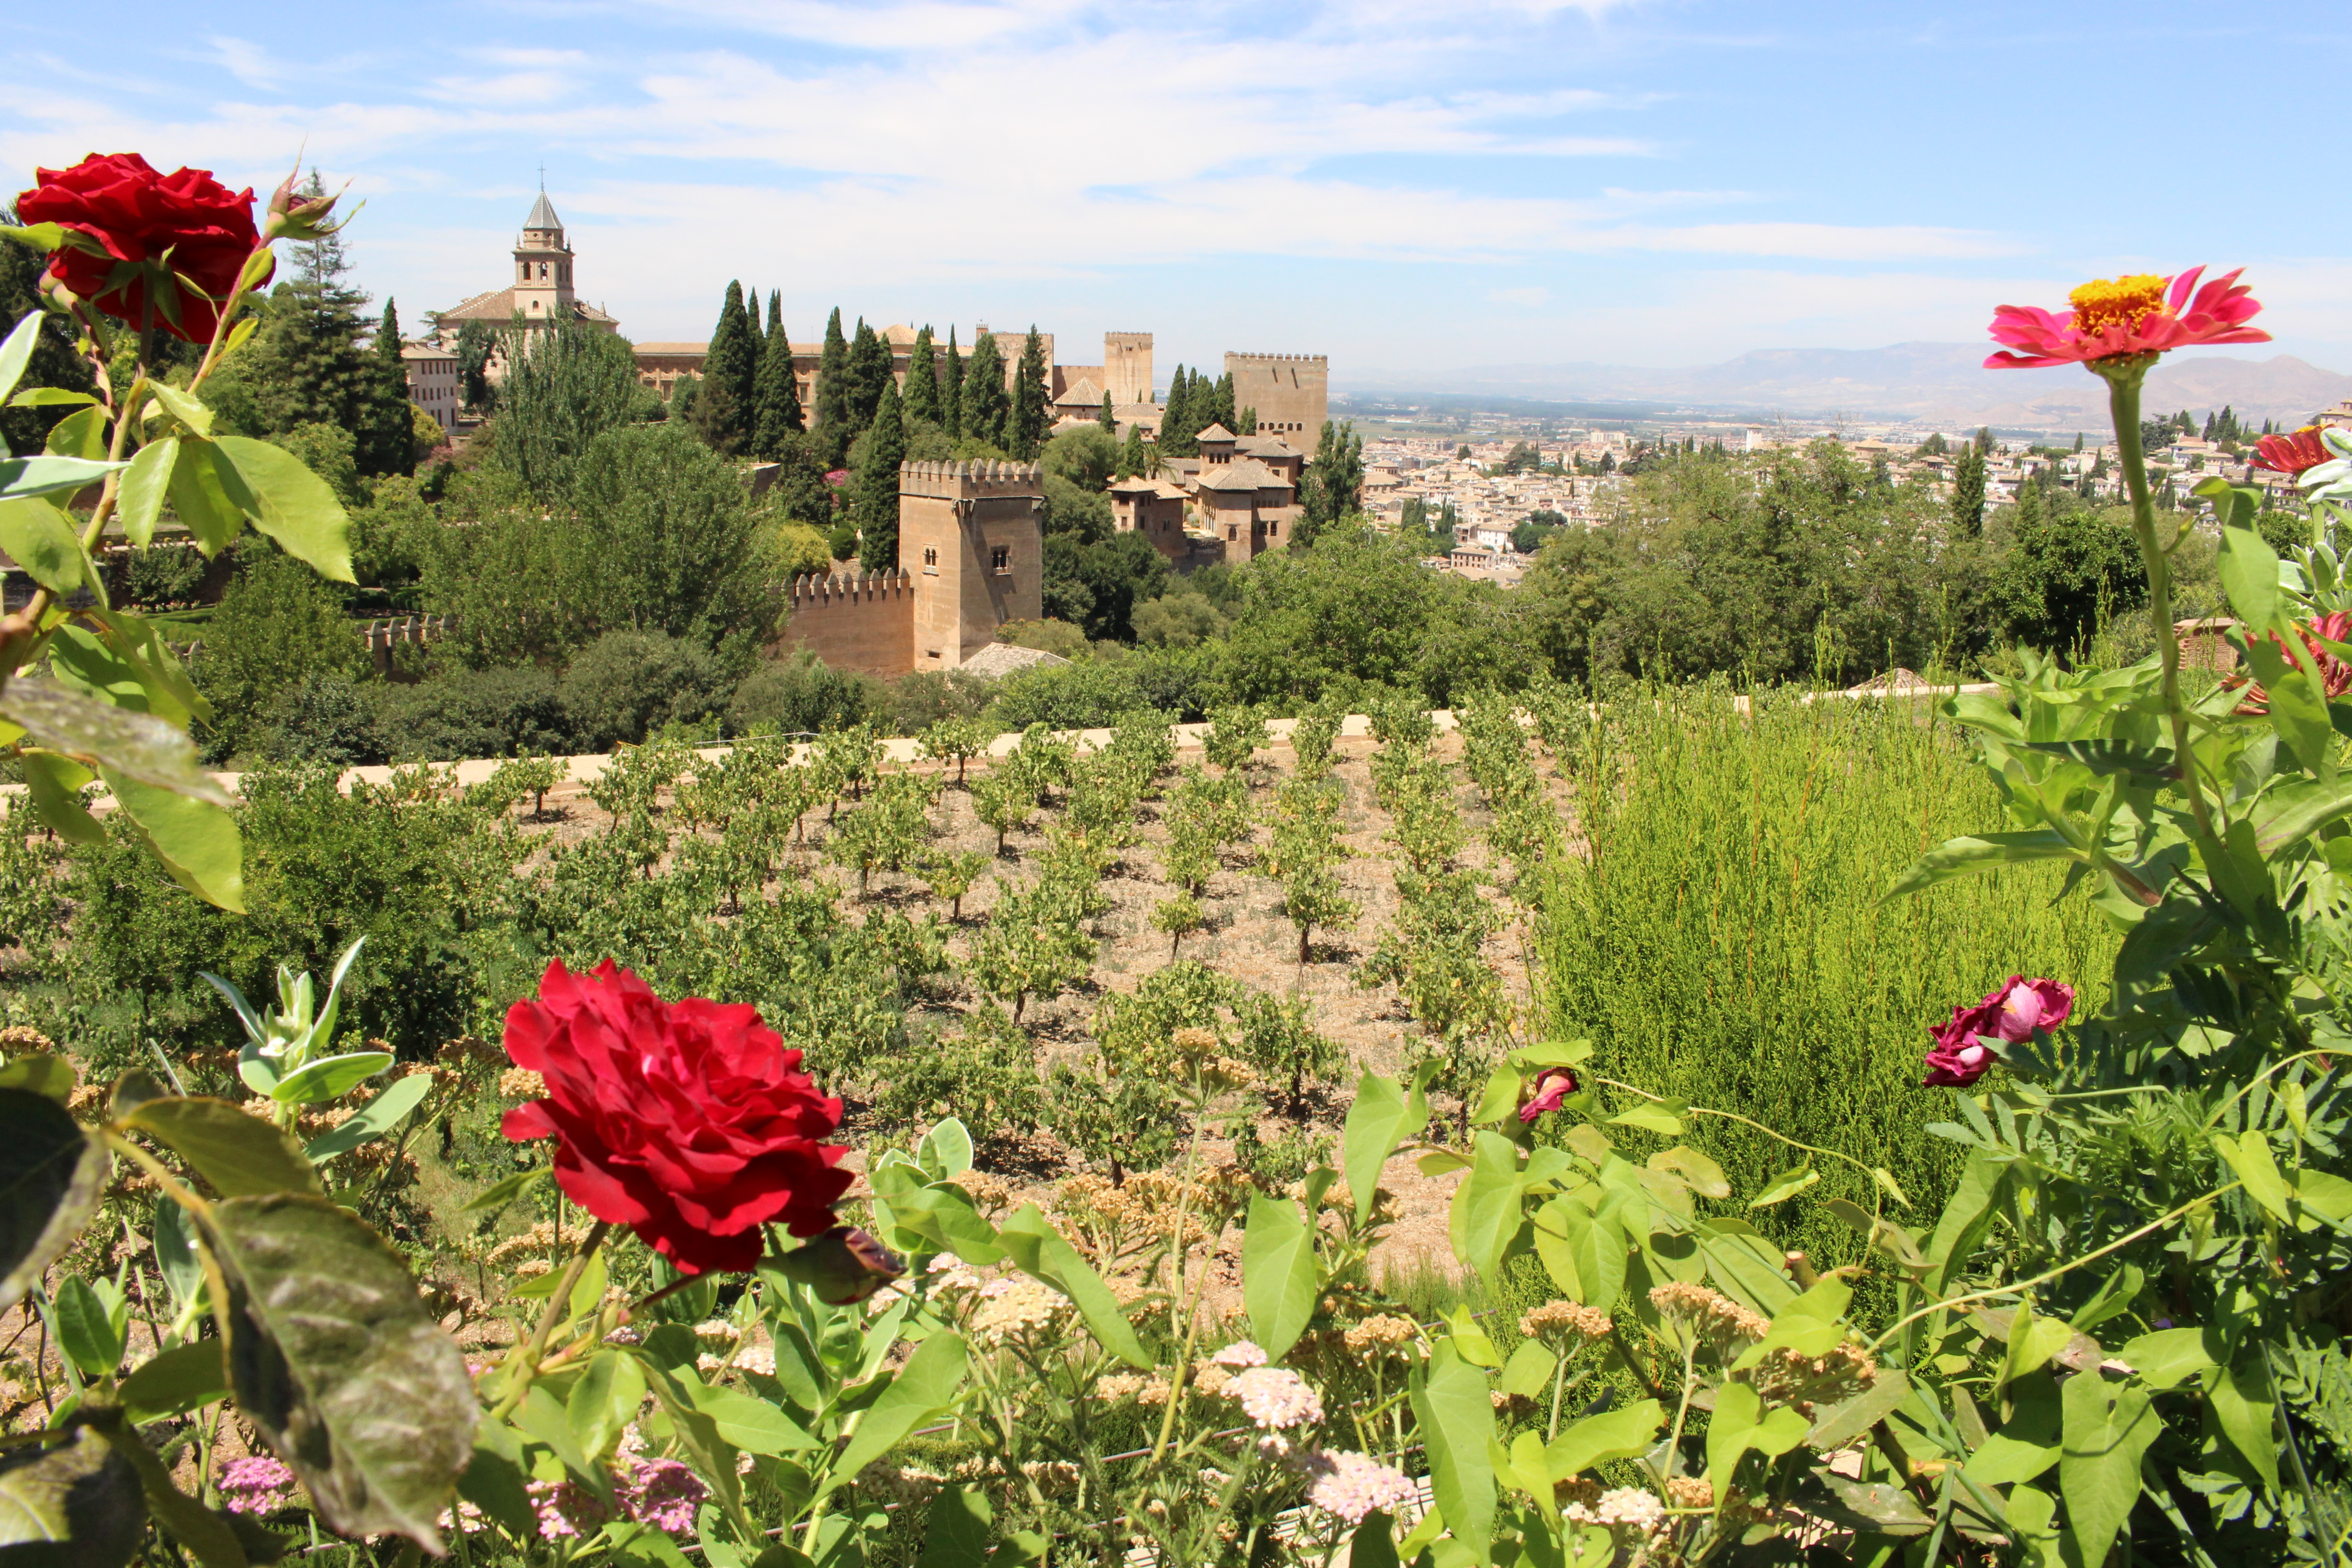 A castle in spain is in the background and in the foreground there are flowers and greenery.